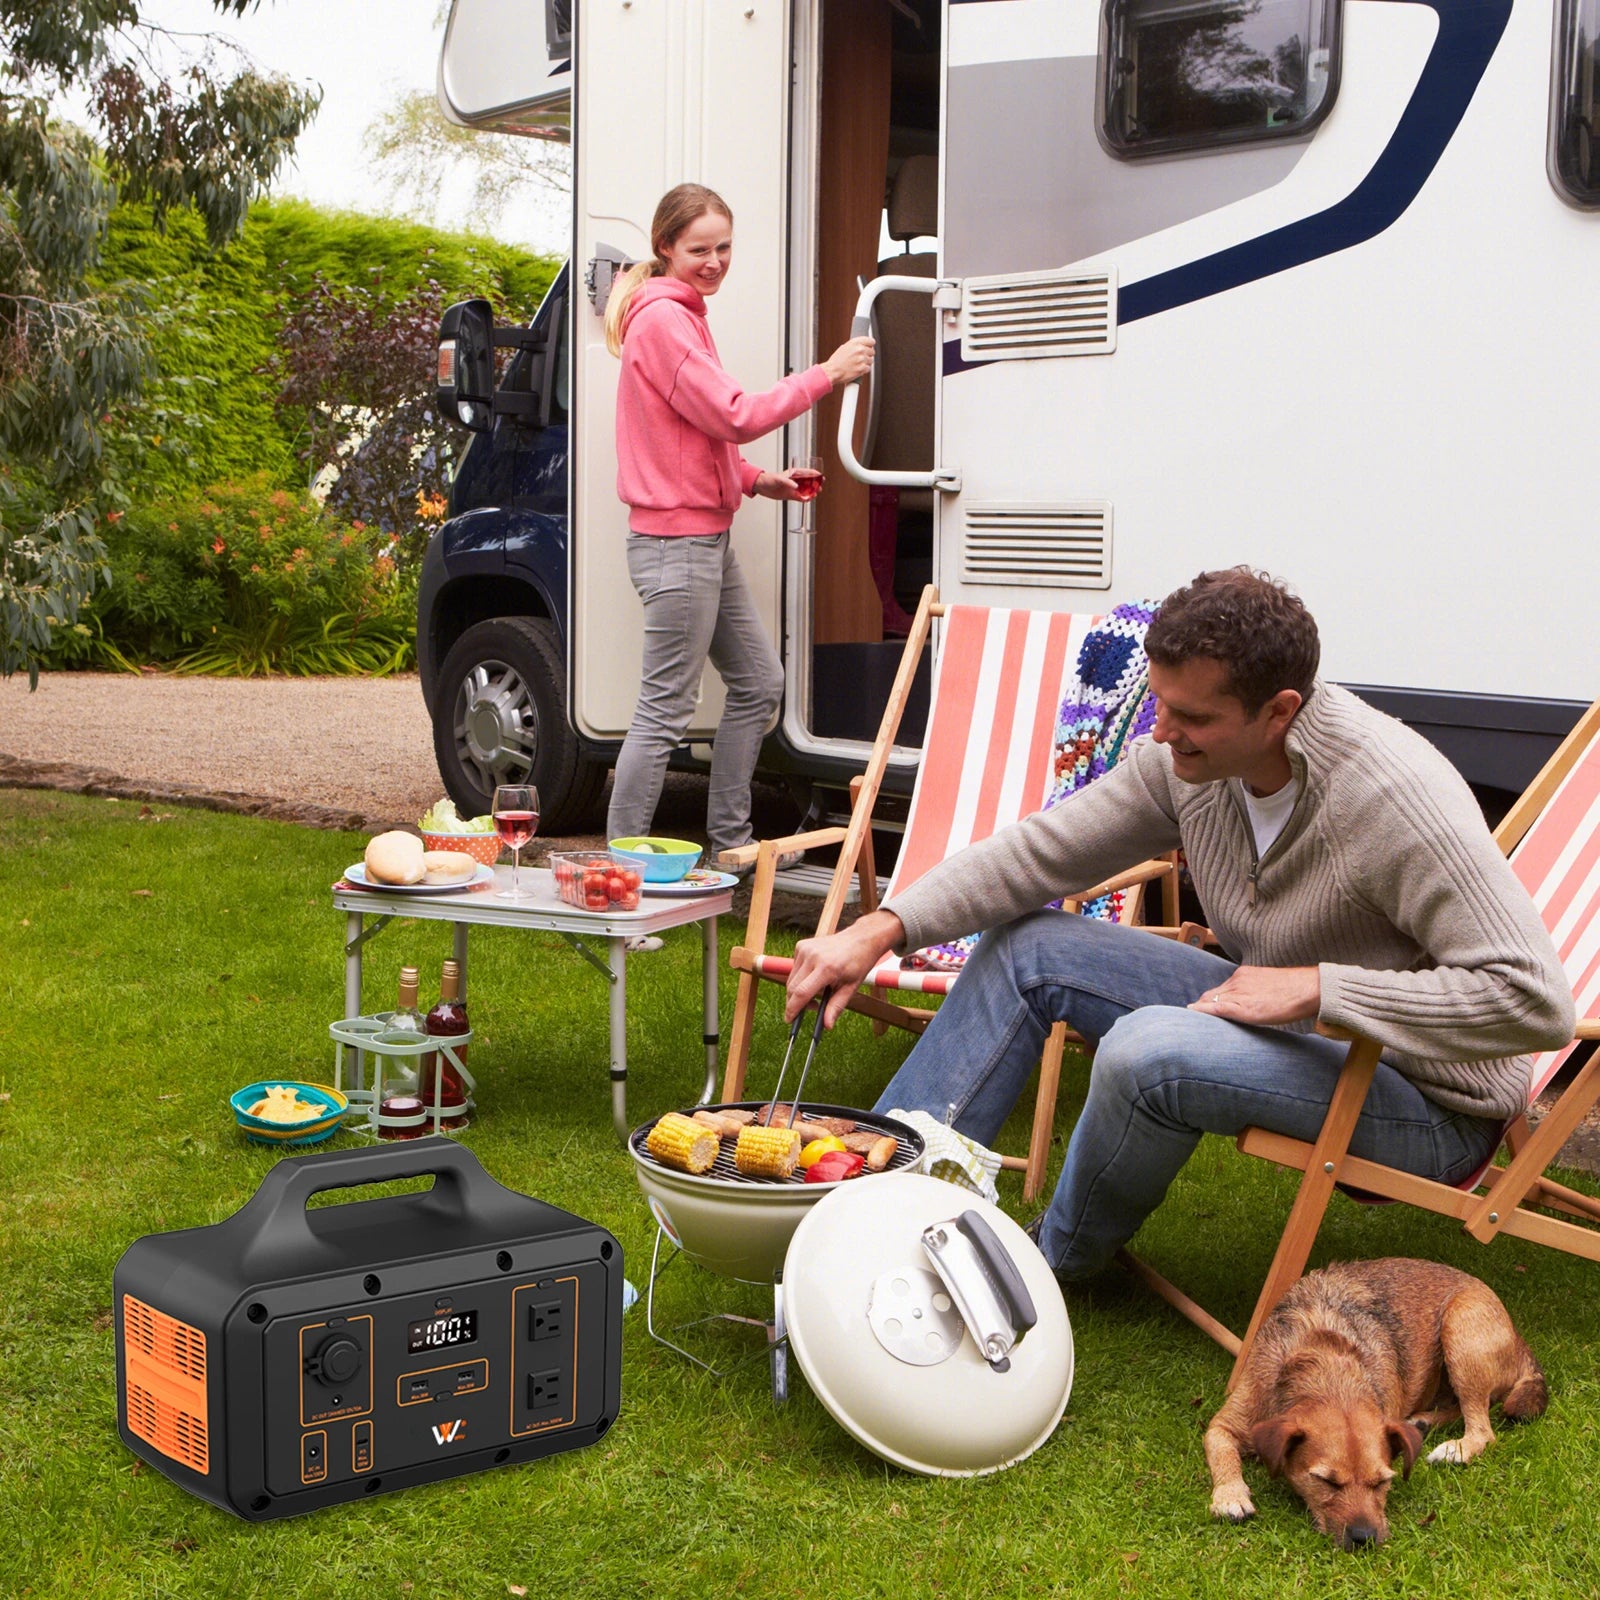 Barler 1000w Portable Power Station, Portable power station for safe charging on-the-go and emergency backup.